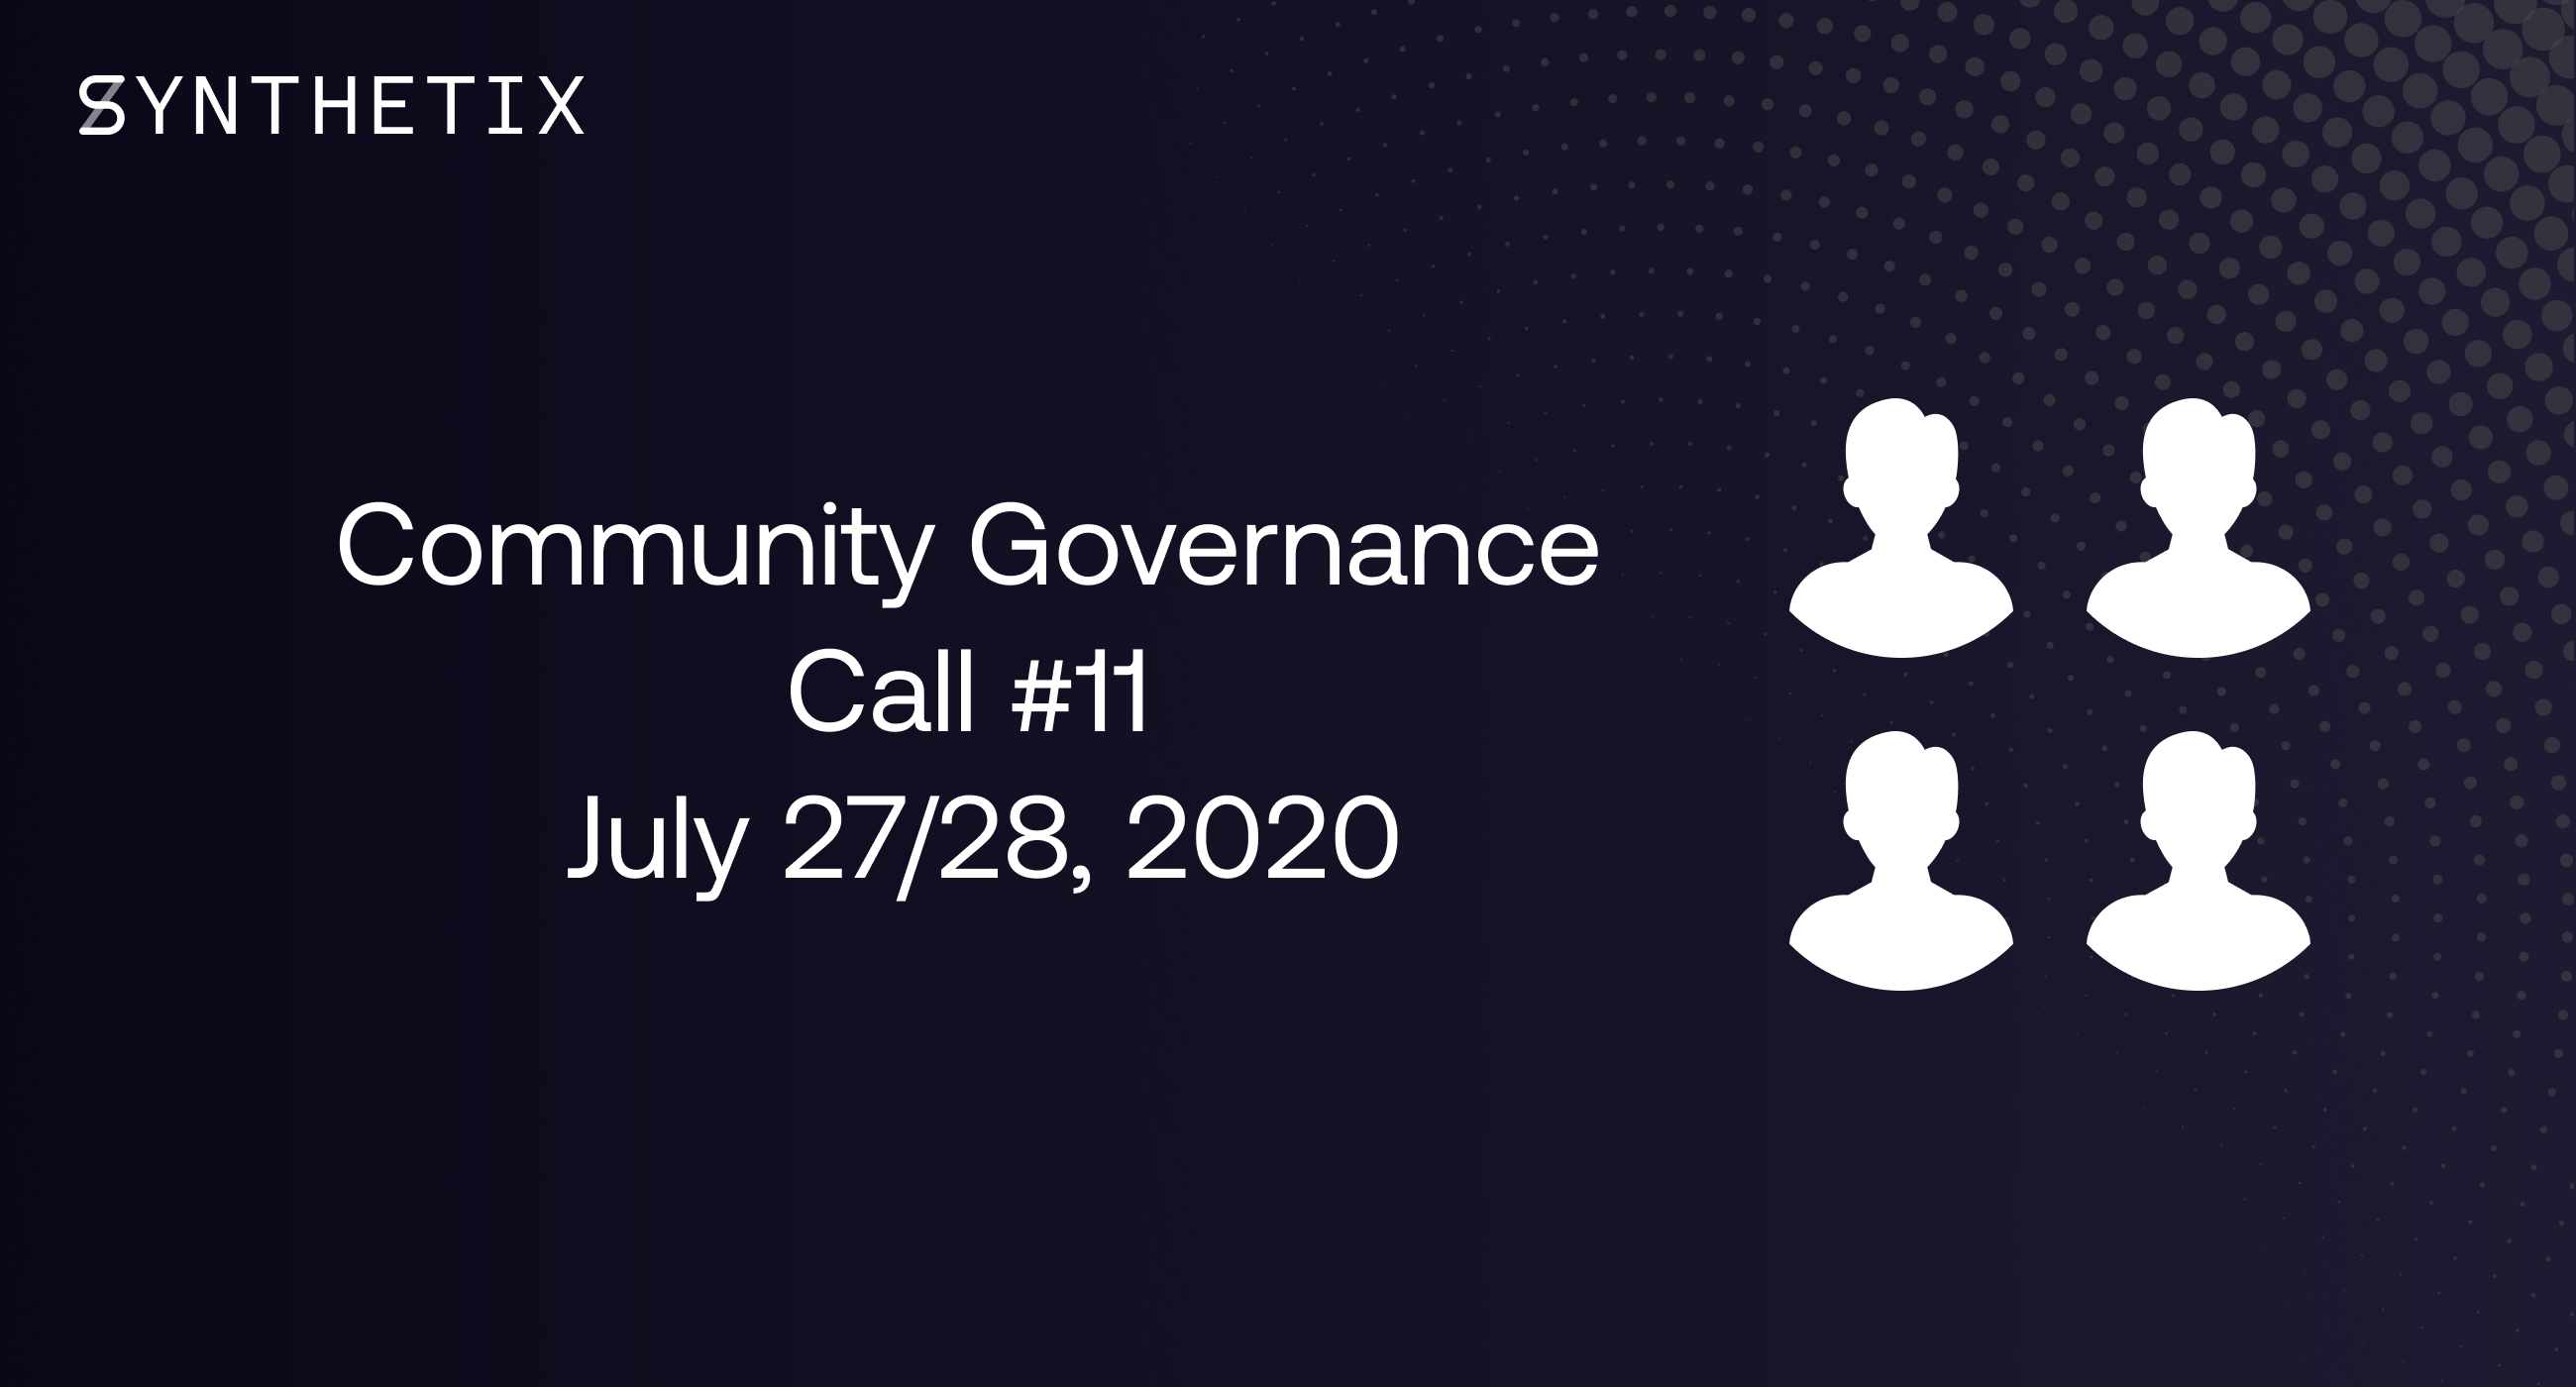 Join us on July 27/28 for the next community governance call!